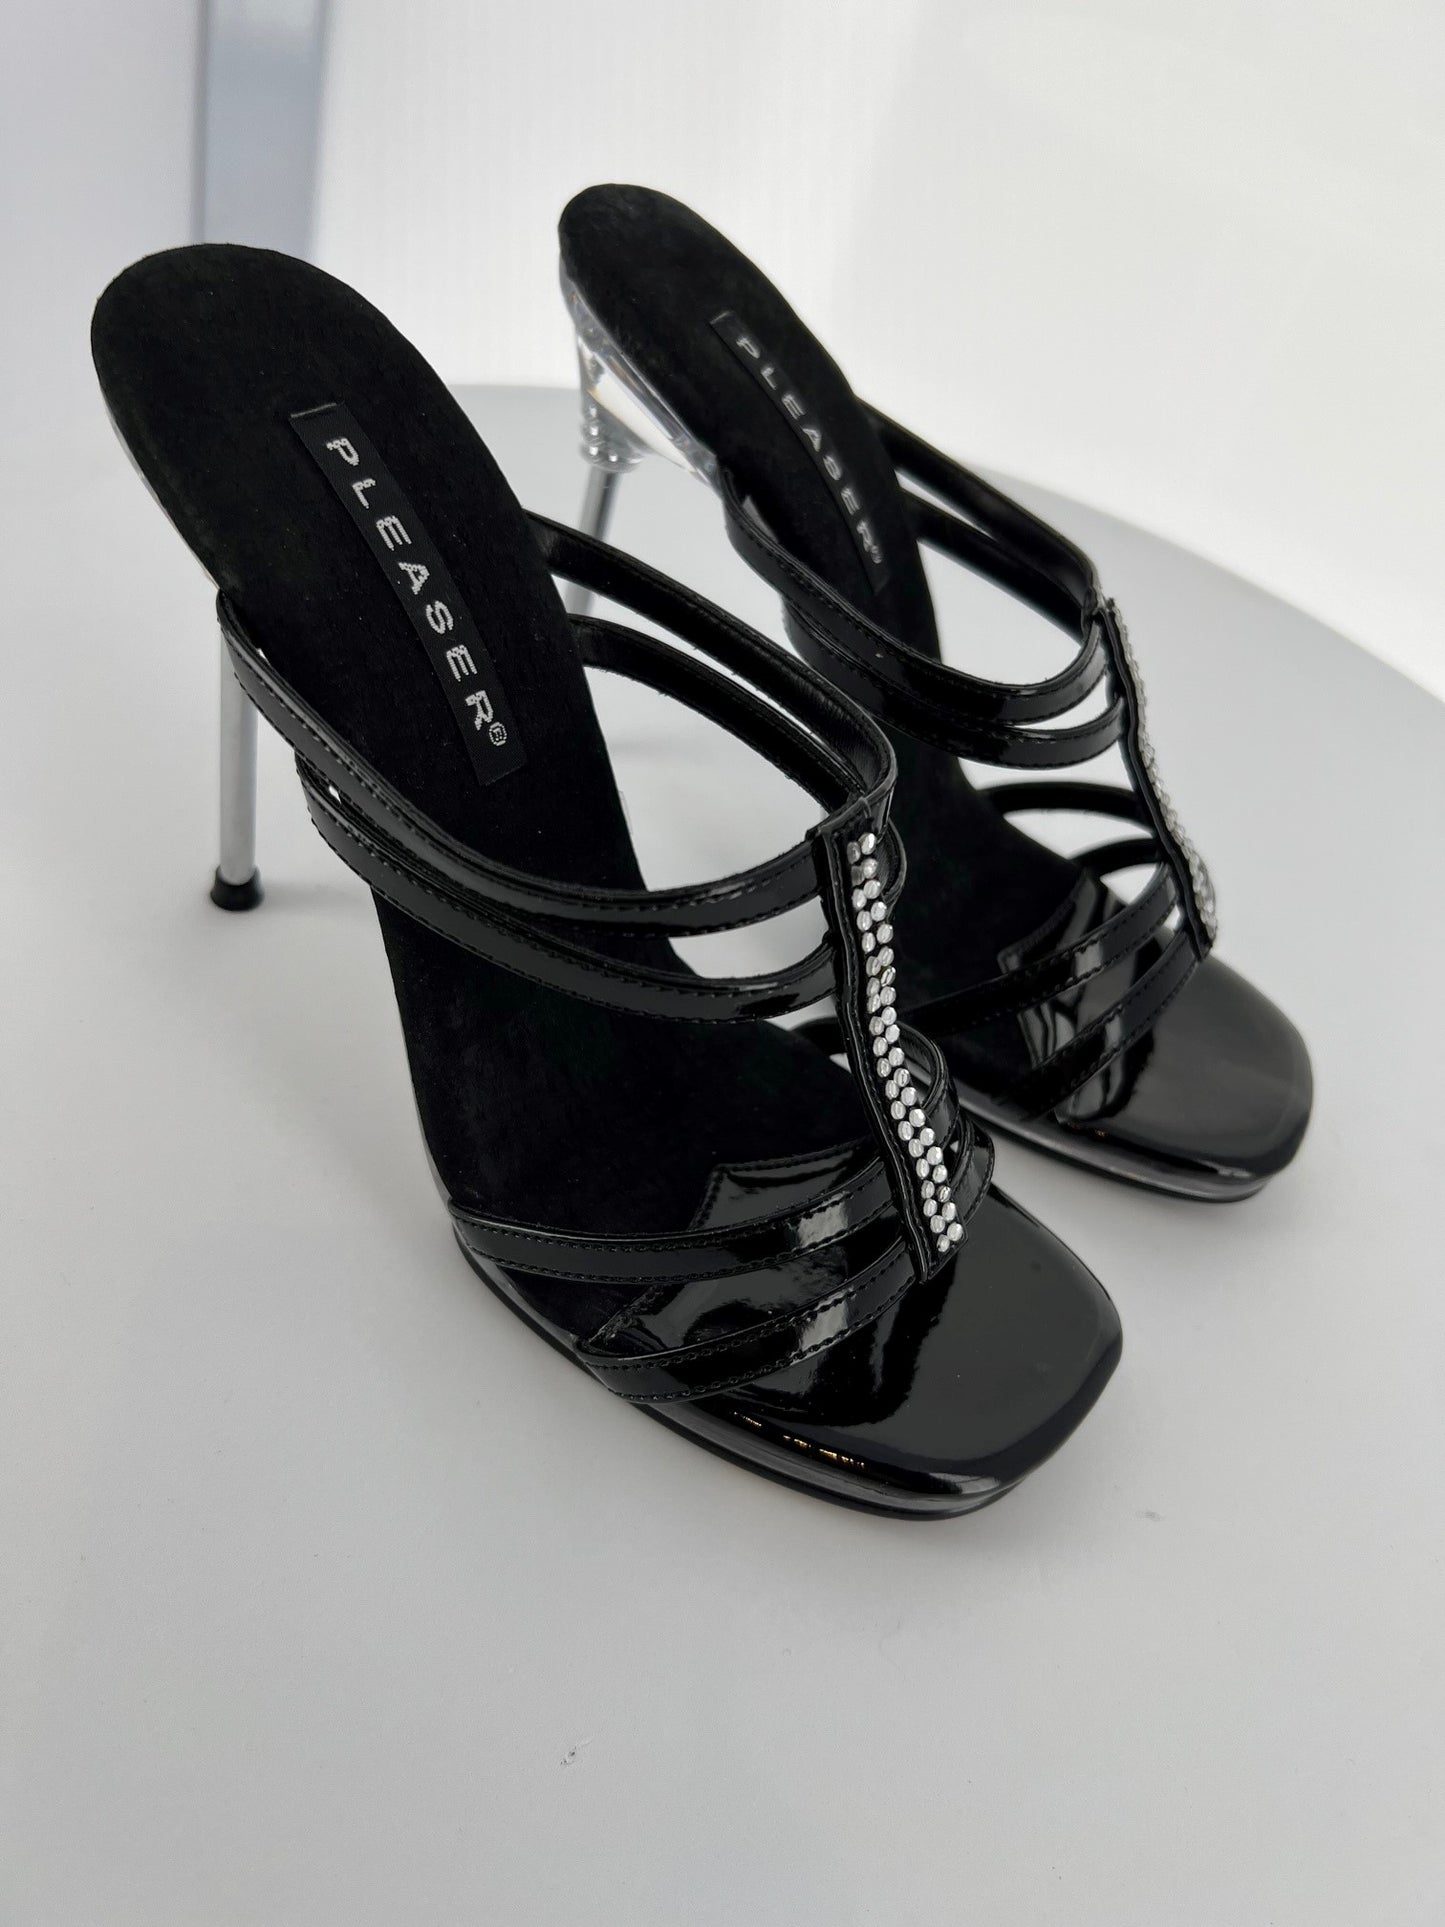 CHIC-04 Pleaser Blk Patent Clear High Heel Alternative Footwear Discontinued Sale Stock